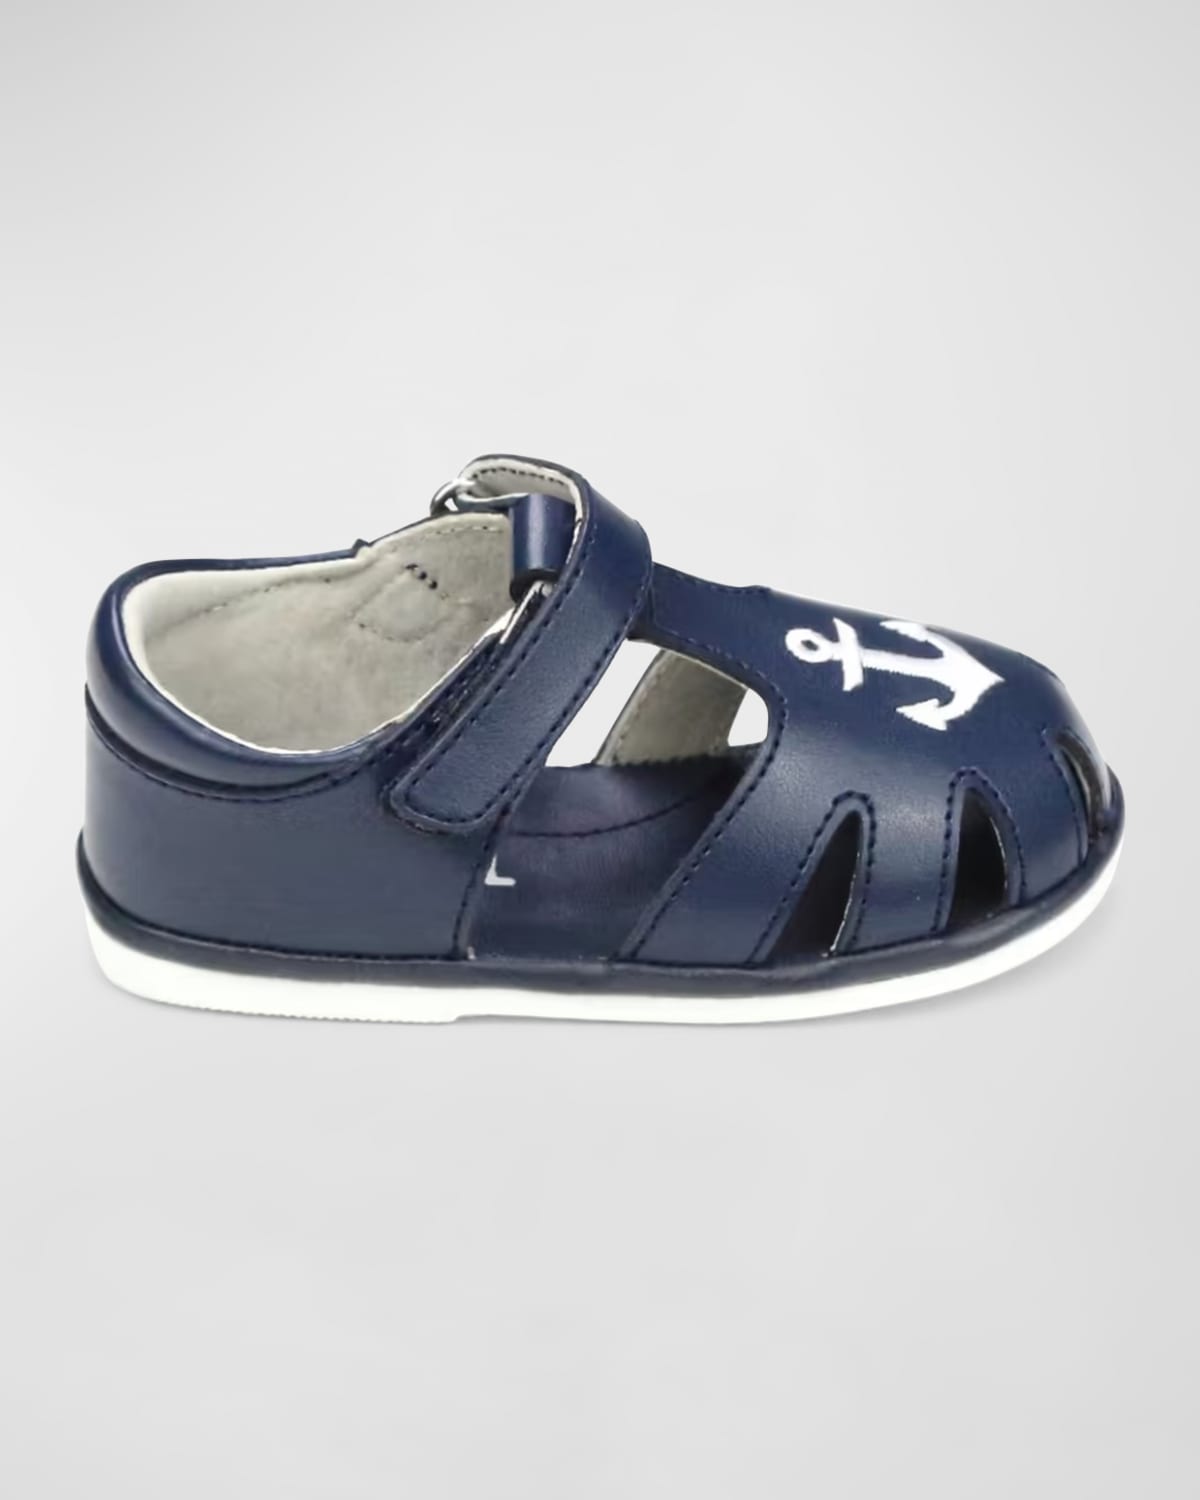 L'amour Shoes Kids' Boy's Sawyer Nautical Caged Leather Sandals, Baby In Blue